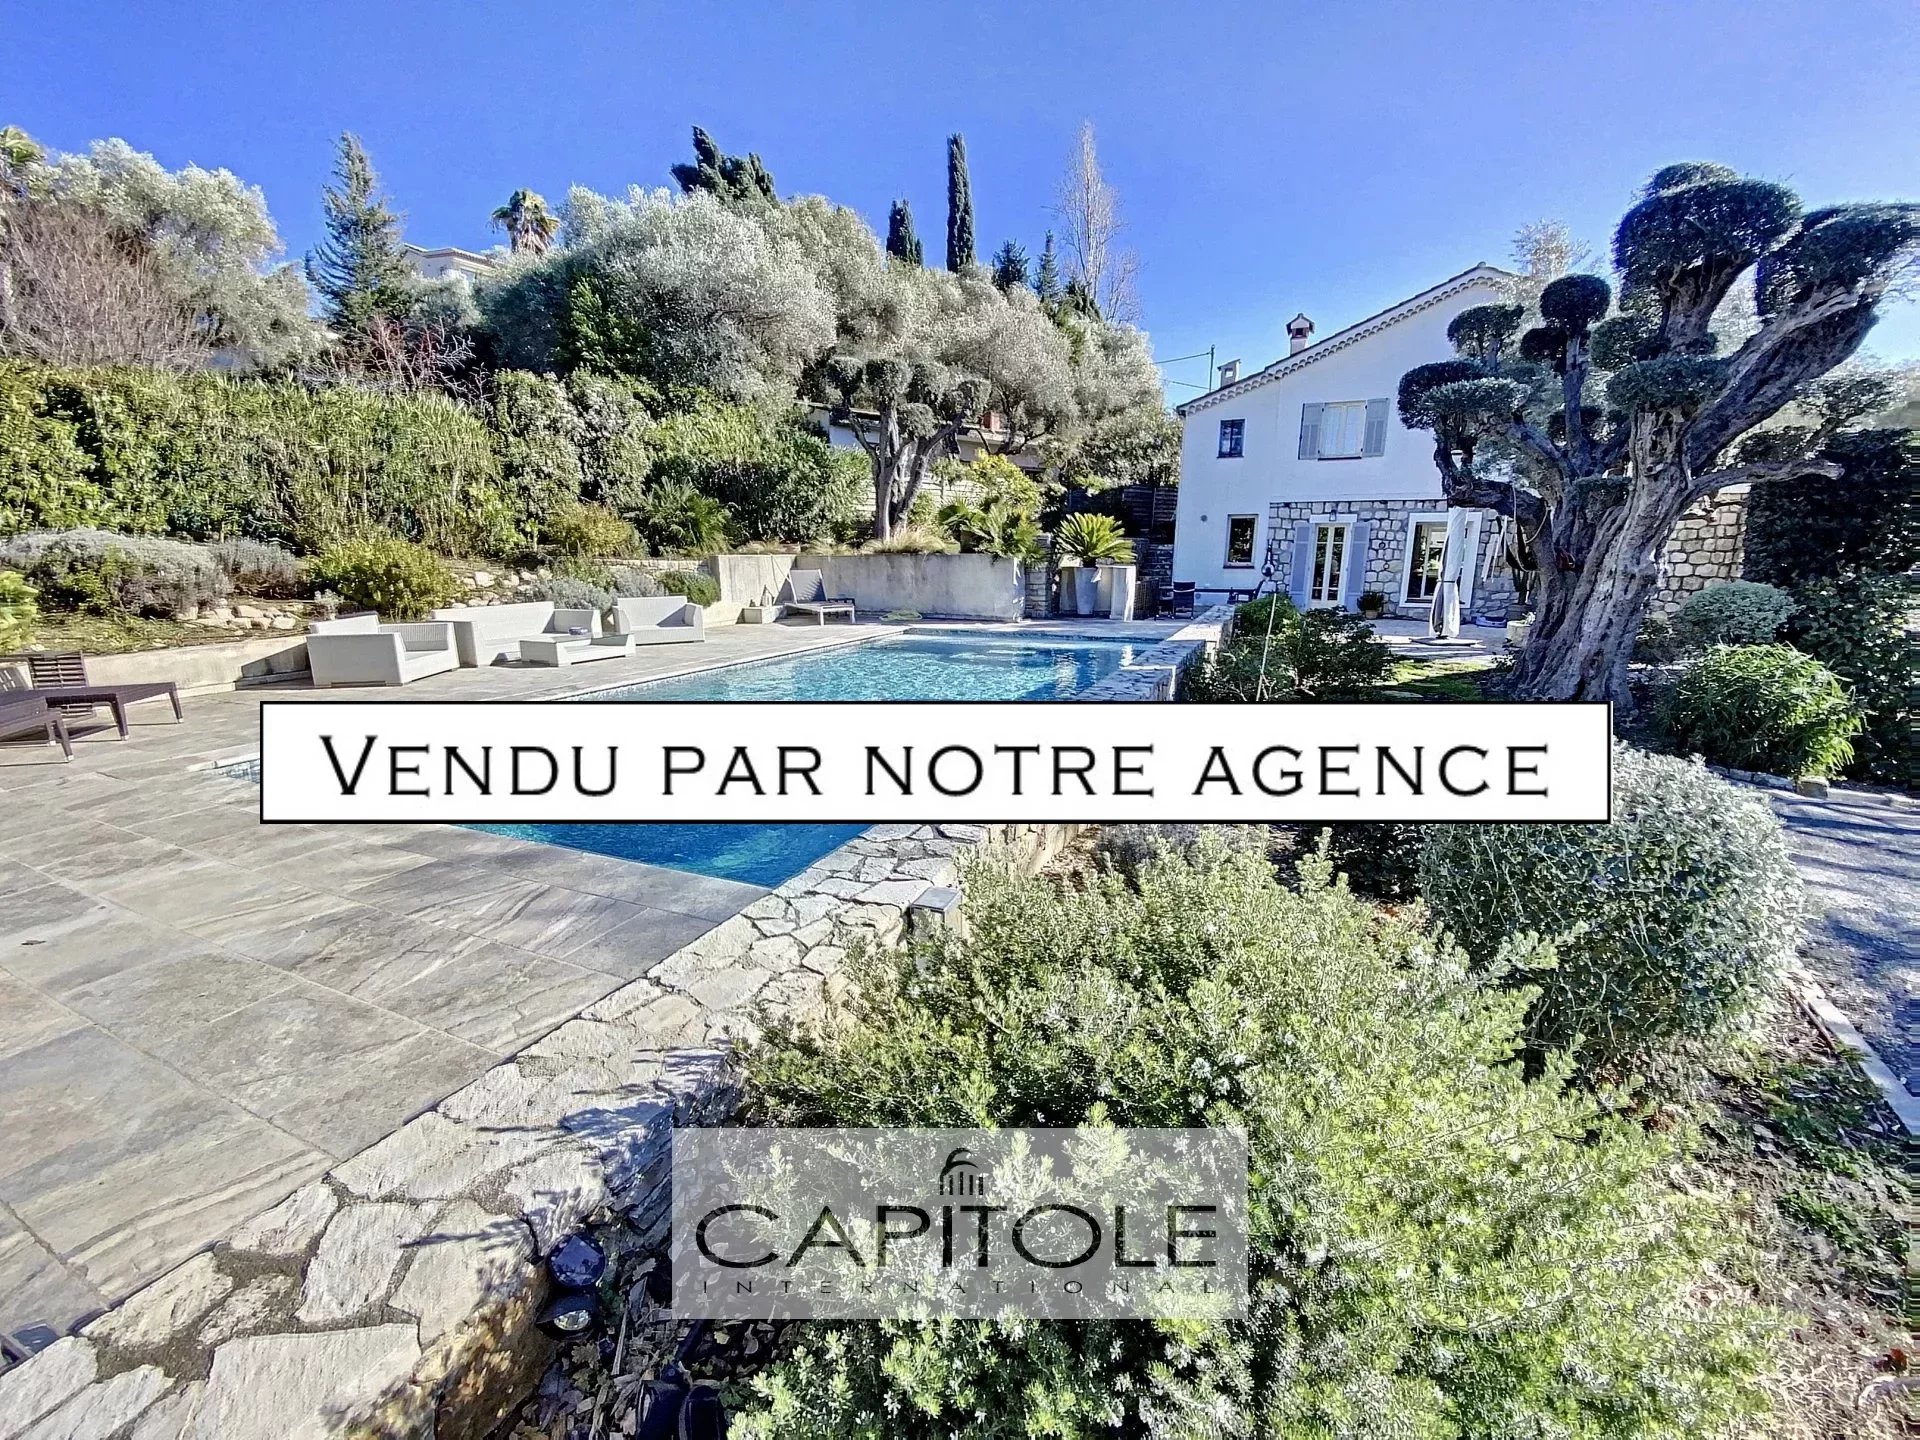 For sale, ANTIBES,  sole agent property 4 bedroom villa of  200 sqm with pool and garden of  1000 sqm